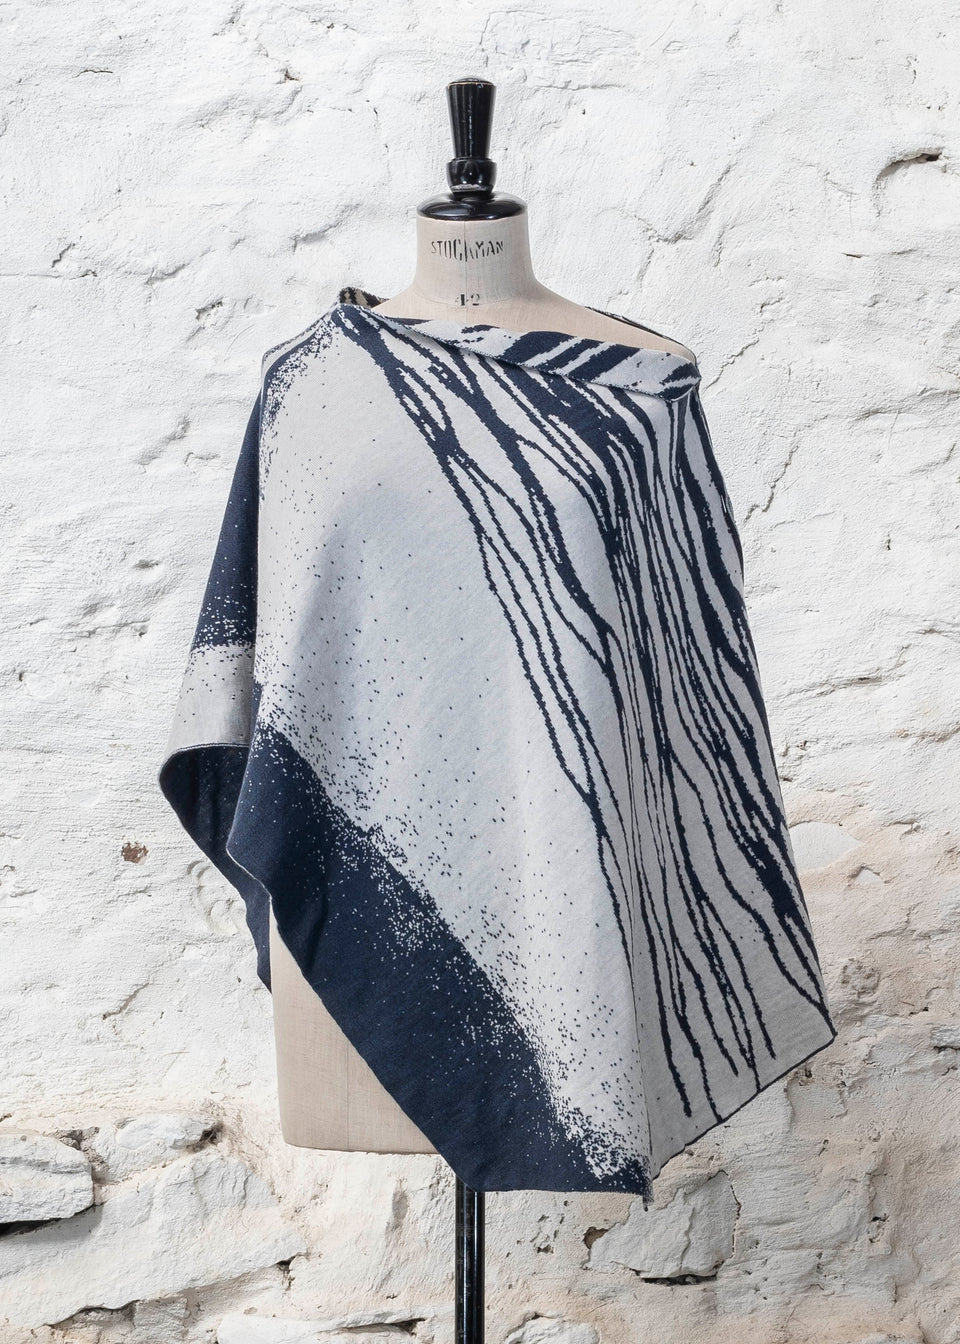 On a vintage dressmakers mannequin shown against a rustic whitewashed wall, a finely knitted poncho in a dark blue and off white. The pattern has an abstract, wavy linear design across one section of the cape. Shown from the front.